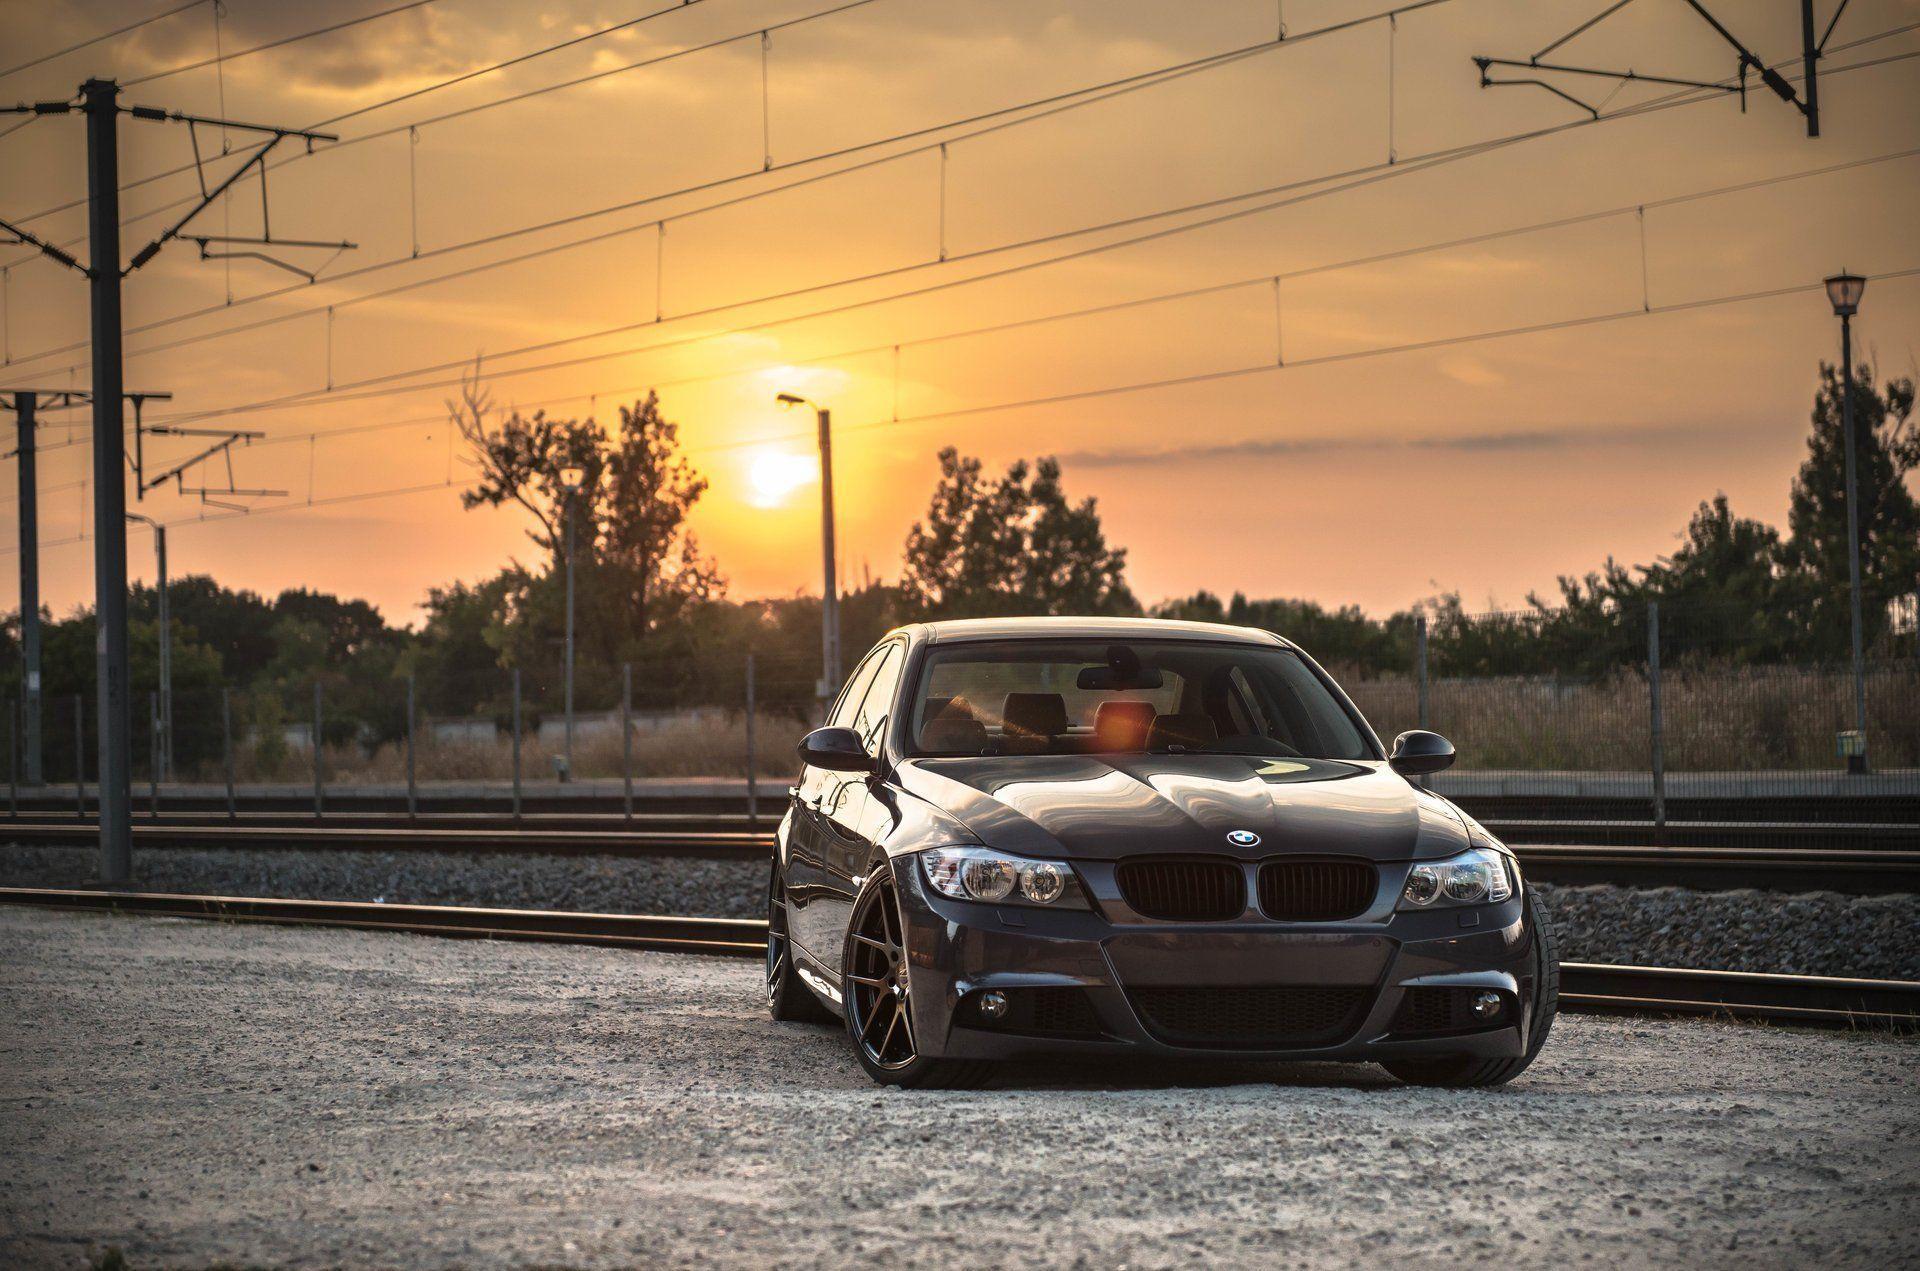 bmw e90 deep concave bmw tuning drives sunset railroad HD wallpapers